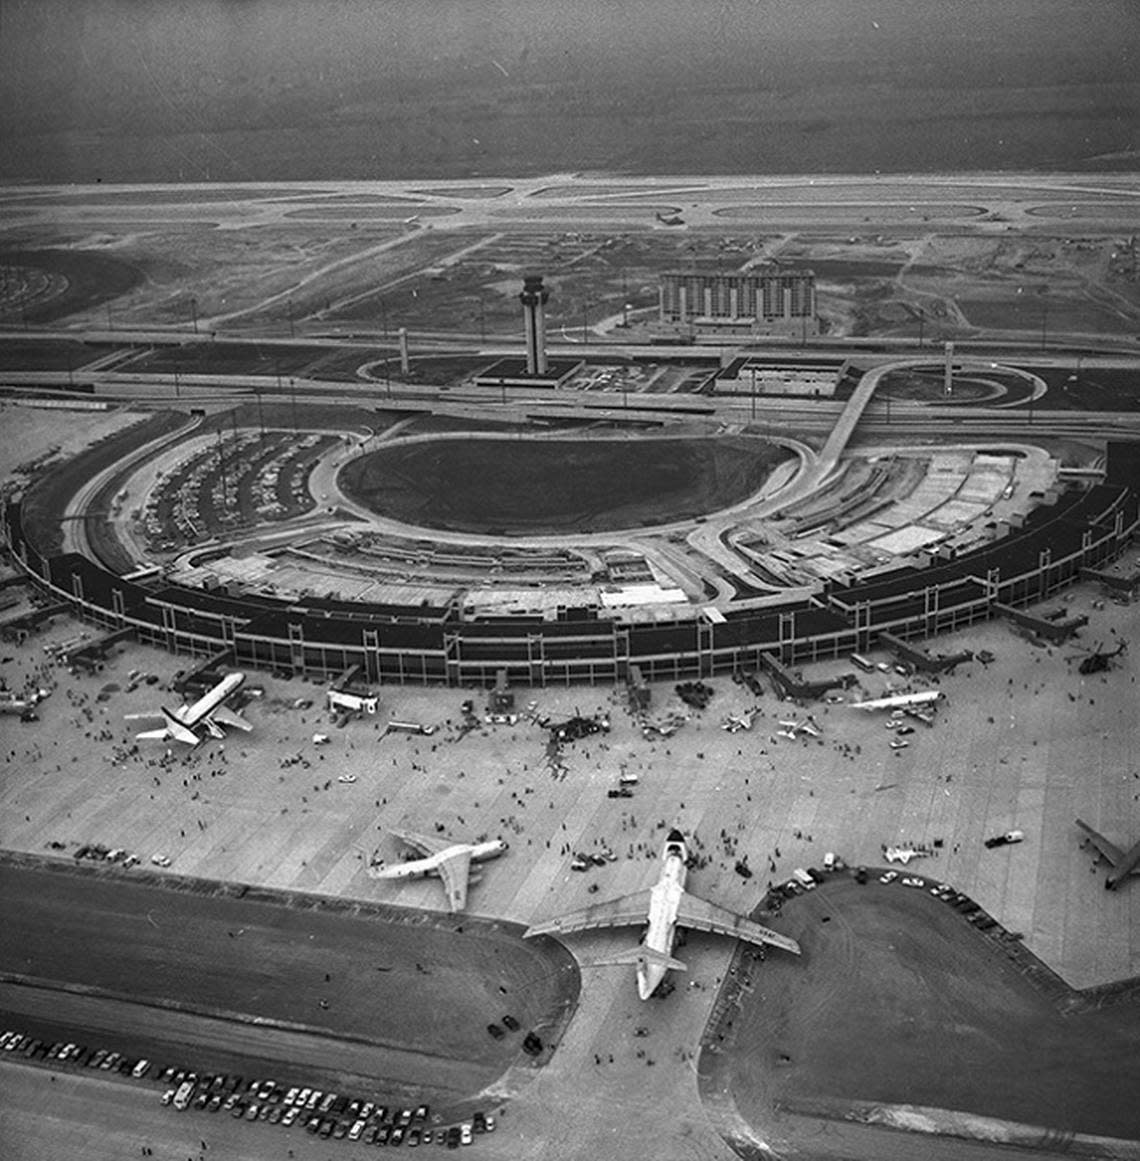 Sept. 23, 1973: Aerial view of the American Airlines terminal at the Dallas-Fort Worth Airport prior to its dedication 09/23/1973.